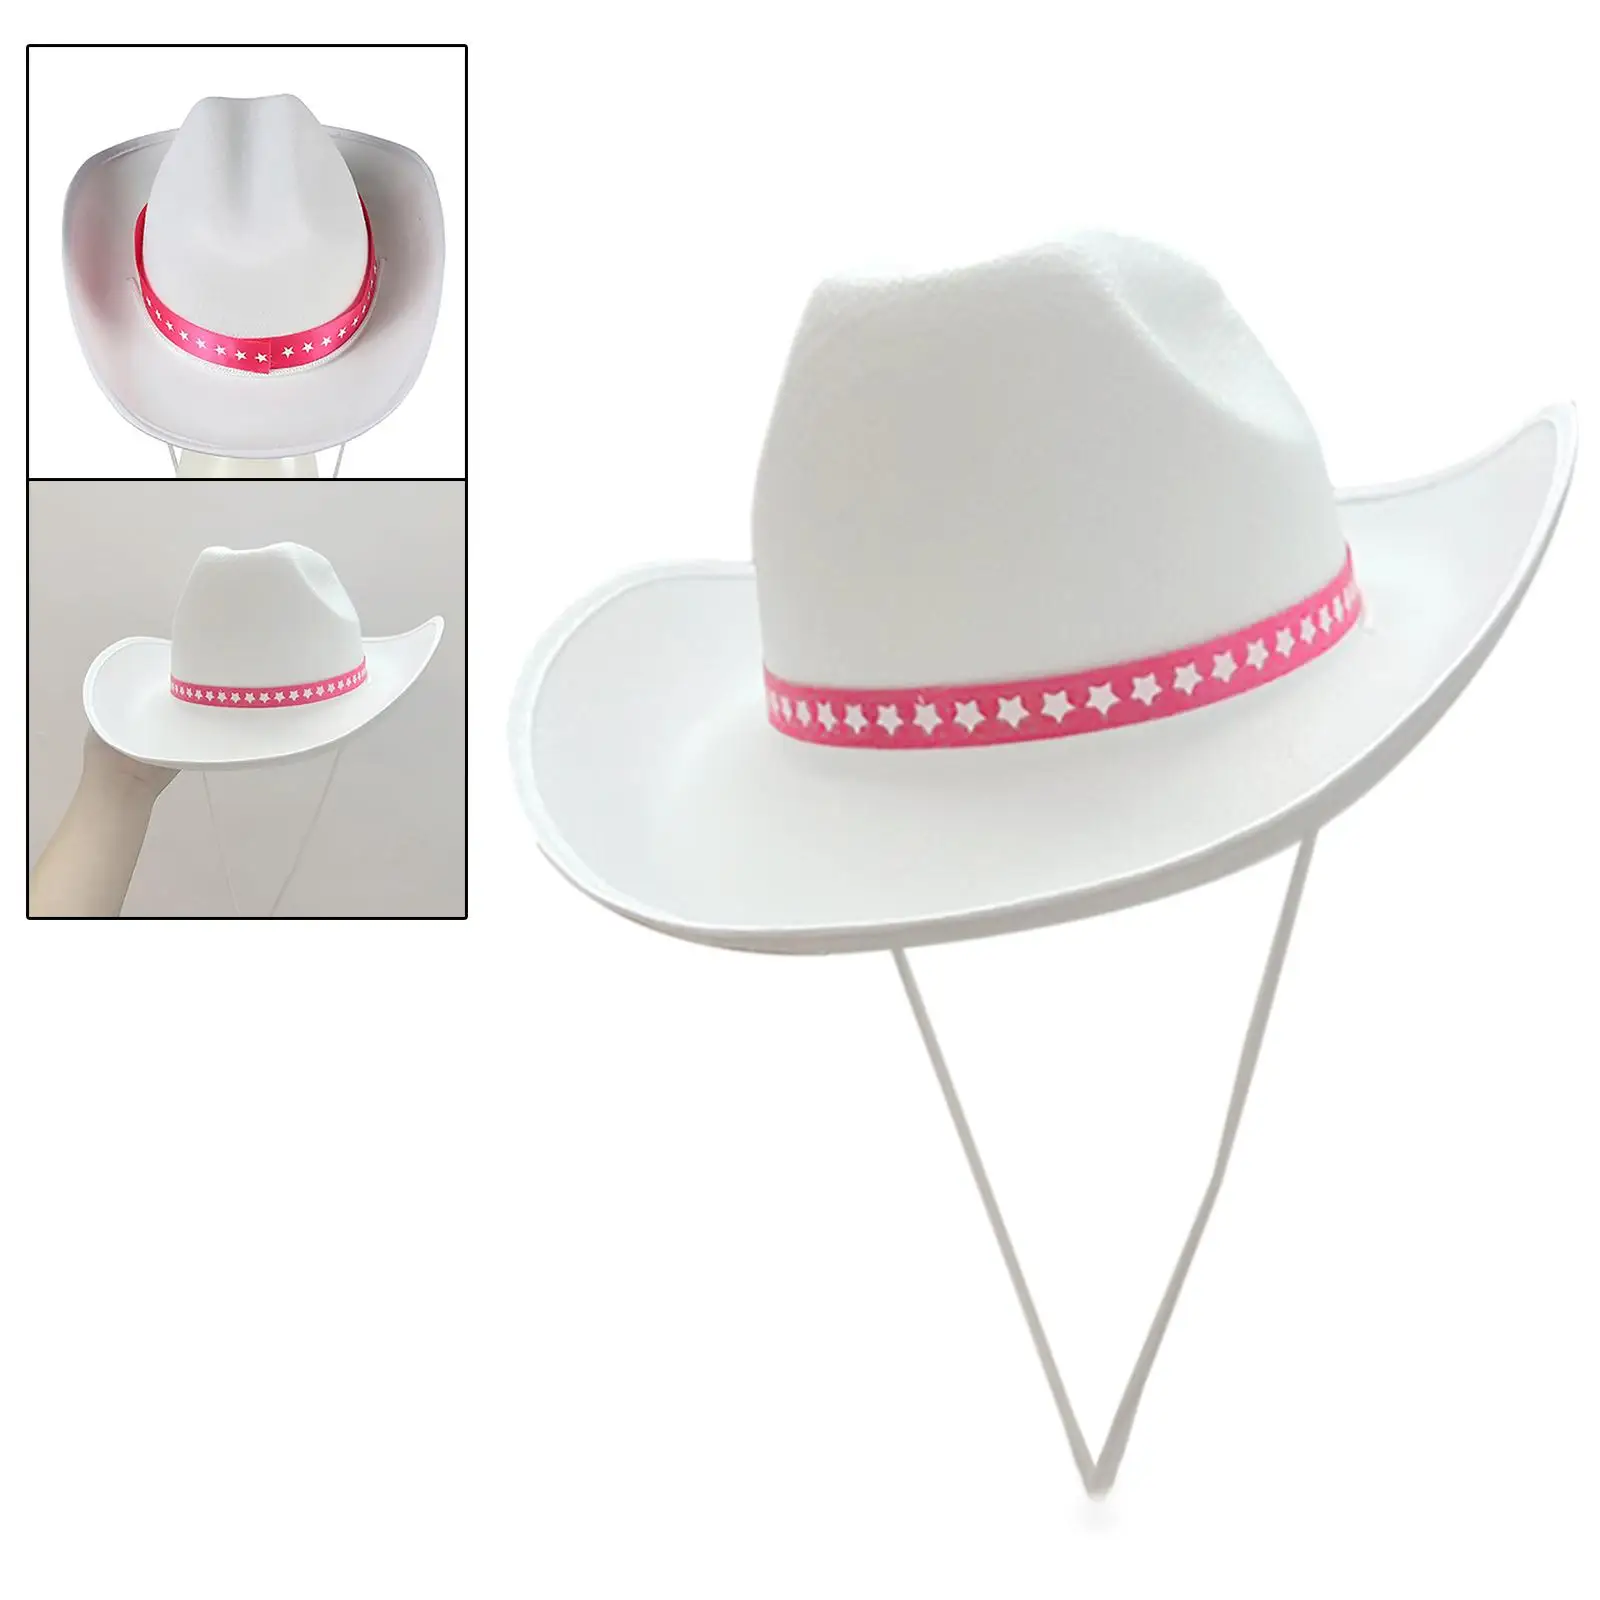 Cowboy Hat Cowgirl Hat Adult Trendy Wide Brim Sunhat Sun Hat for Fishing Themed Party Photo Props Stage Performance Cosplay